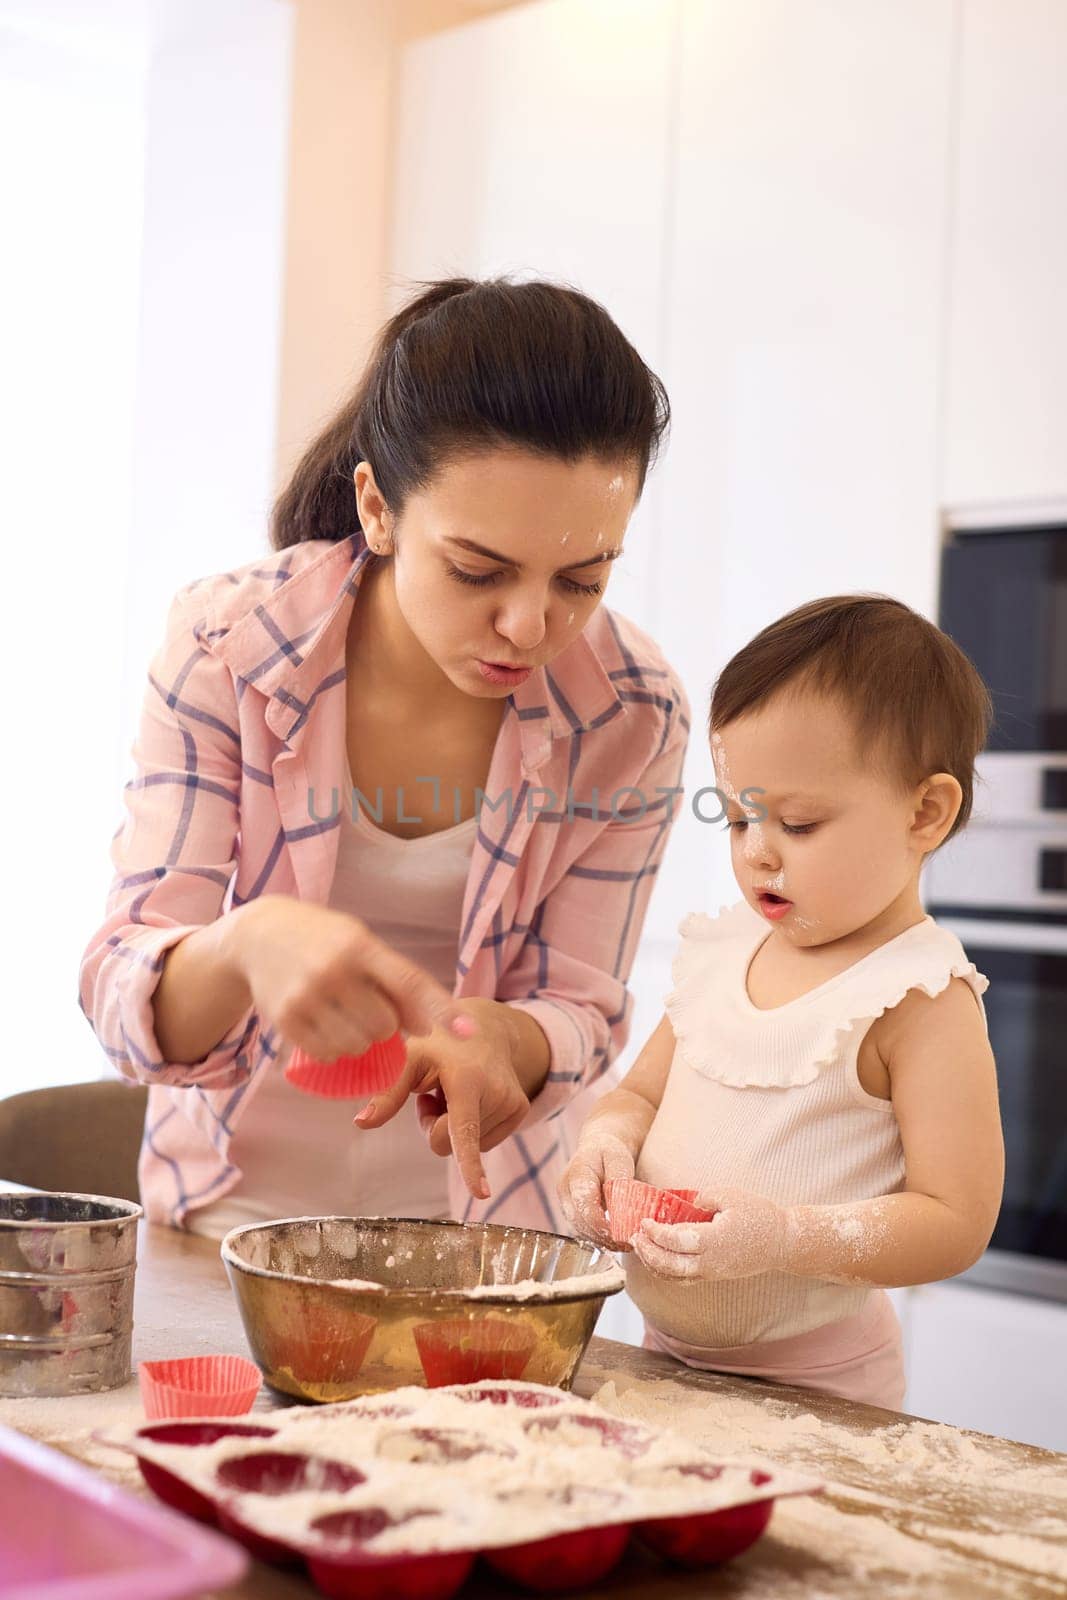 mother and little baby girl baking in the kitchen, bake cookies. happy time together